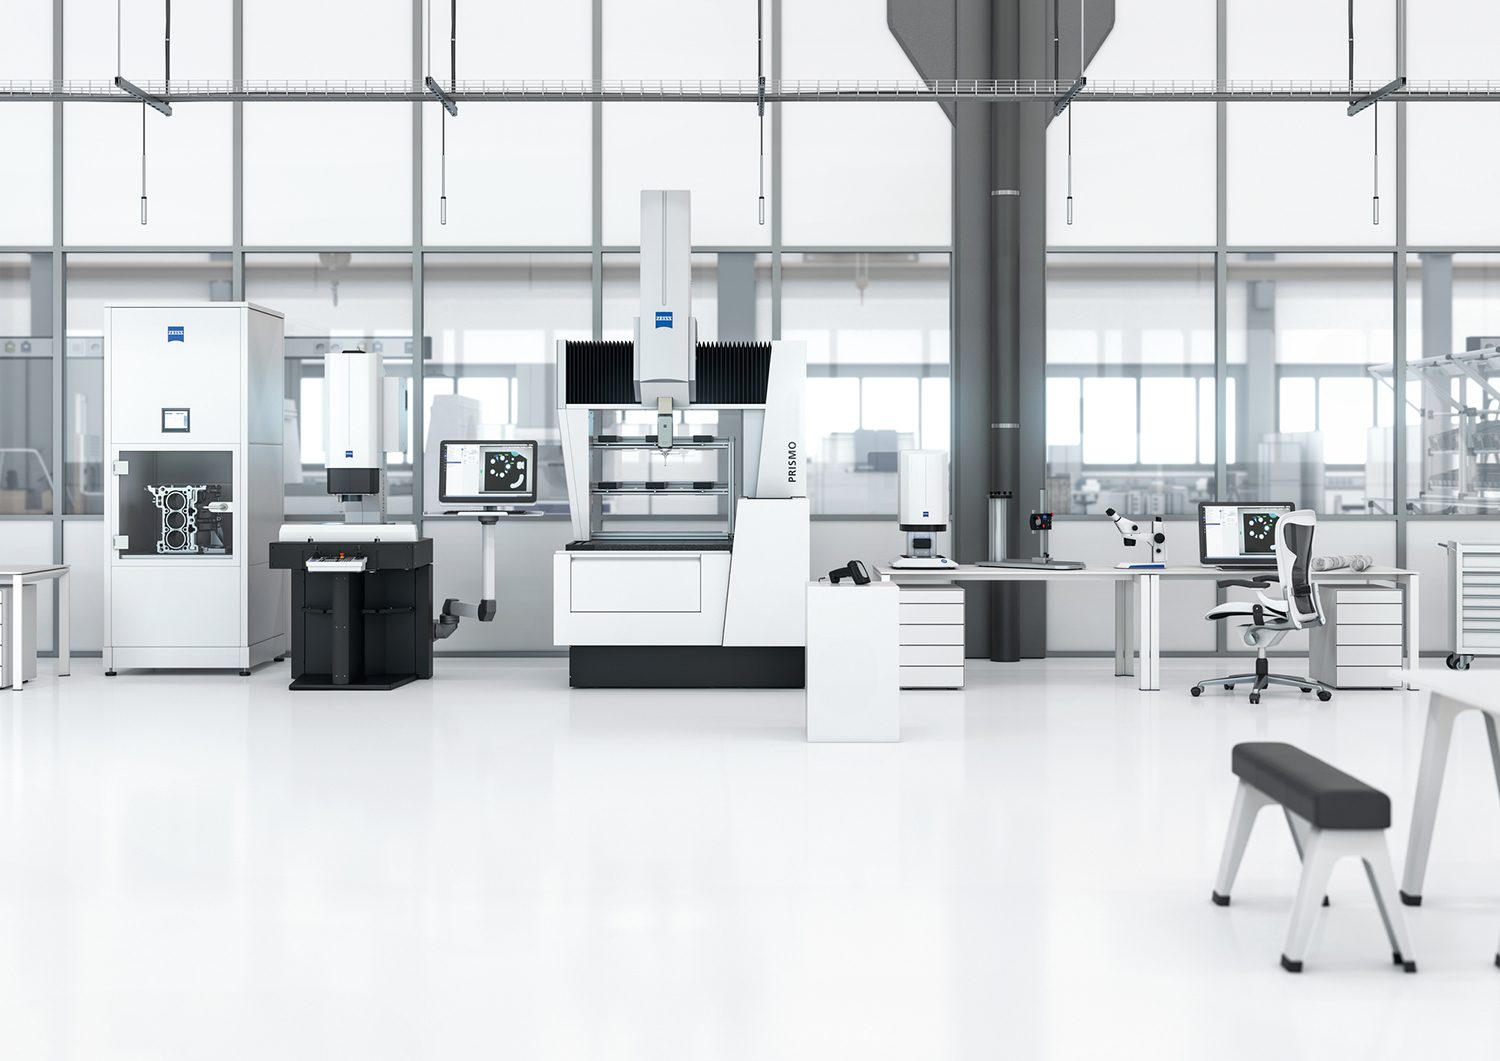 ZEISS Industrial Quality Solutions